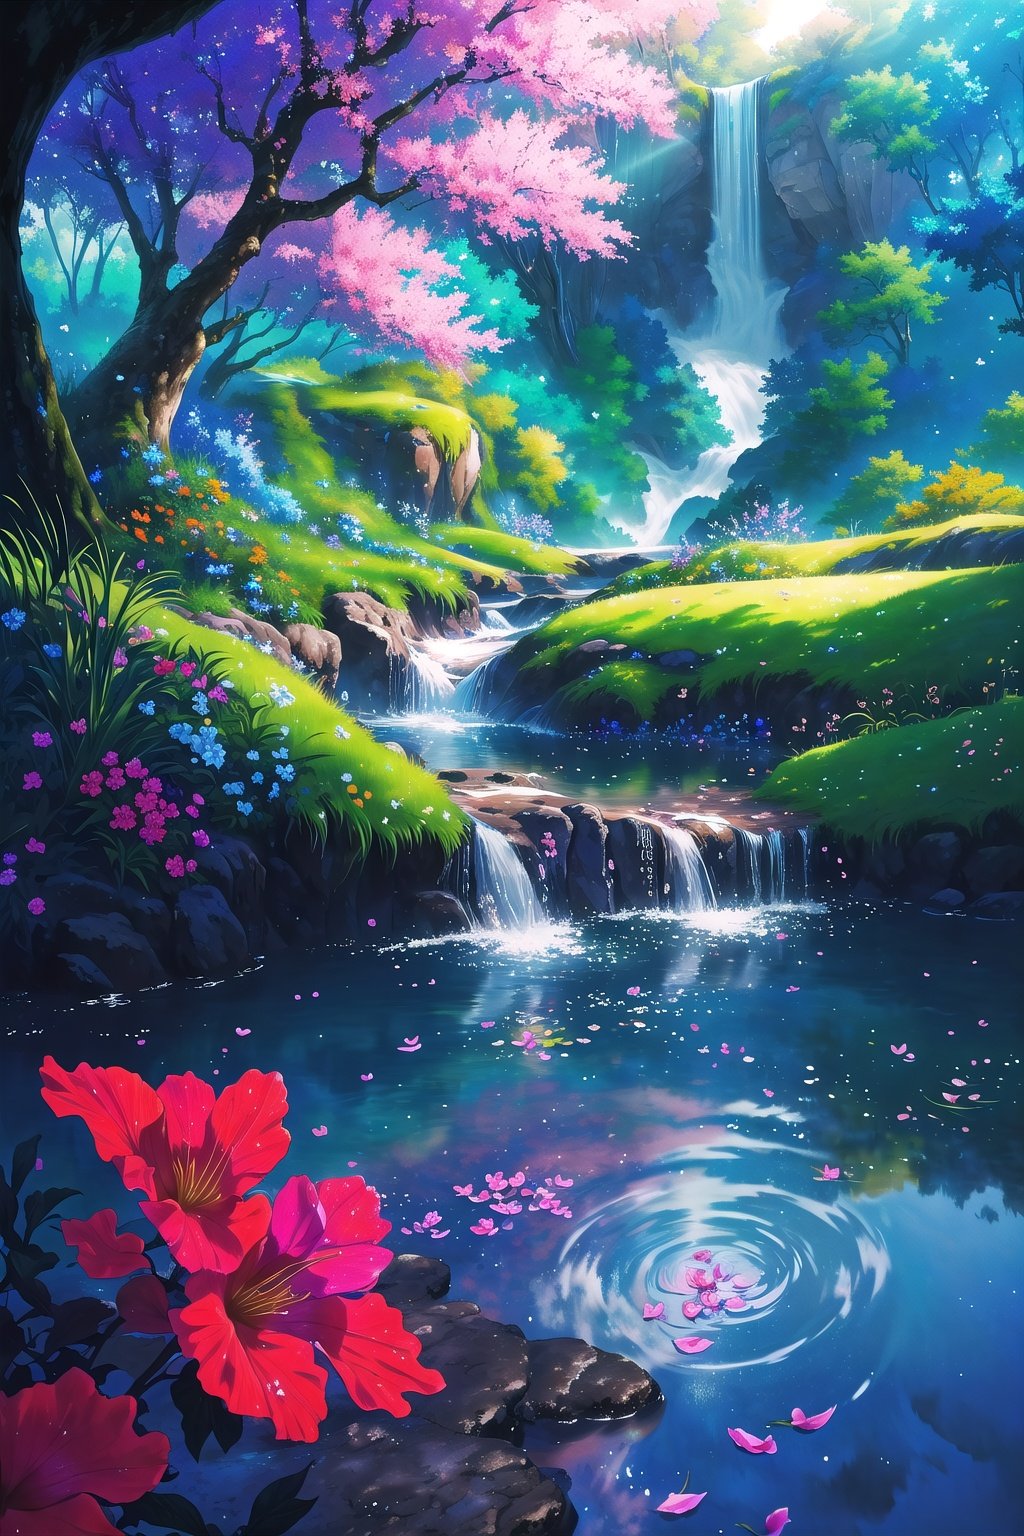 (Masterpiece,  Best Quality:1.4),  top quality,  (8k resolution),  cg unity wallpaper,  hyperrealistic,  digital illustration,  official art,  Manga,  (hyperdetailed),  natural lighting,  full background,  beautiful,  perfect,  nature,  scenery,  garden,  flower,  flowers,  magical landscape,  floating particles,  vivid,  (fantasy:1.1),  shimmer,  (multicolored theme:1.3),  shallow depth of field,  perfect lighting,  (day,  sunlight,  light theme,  outdoors:1.3),  windy,  flying petals,  tree,  waterfall,  water,  stream,  (deep depth of field:1.5),  dappled sunlight,  (halation:0.8),  paradise,  (highres)